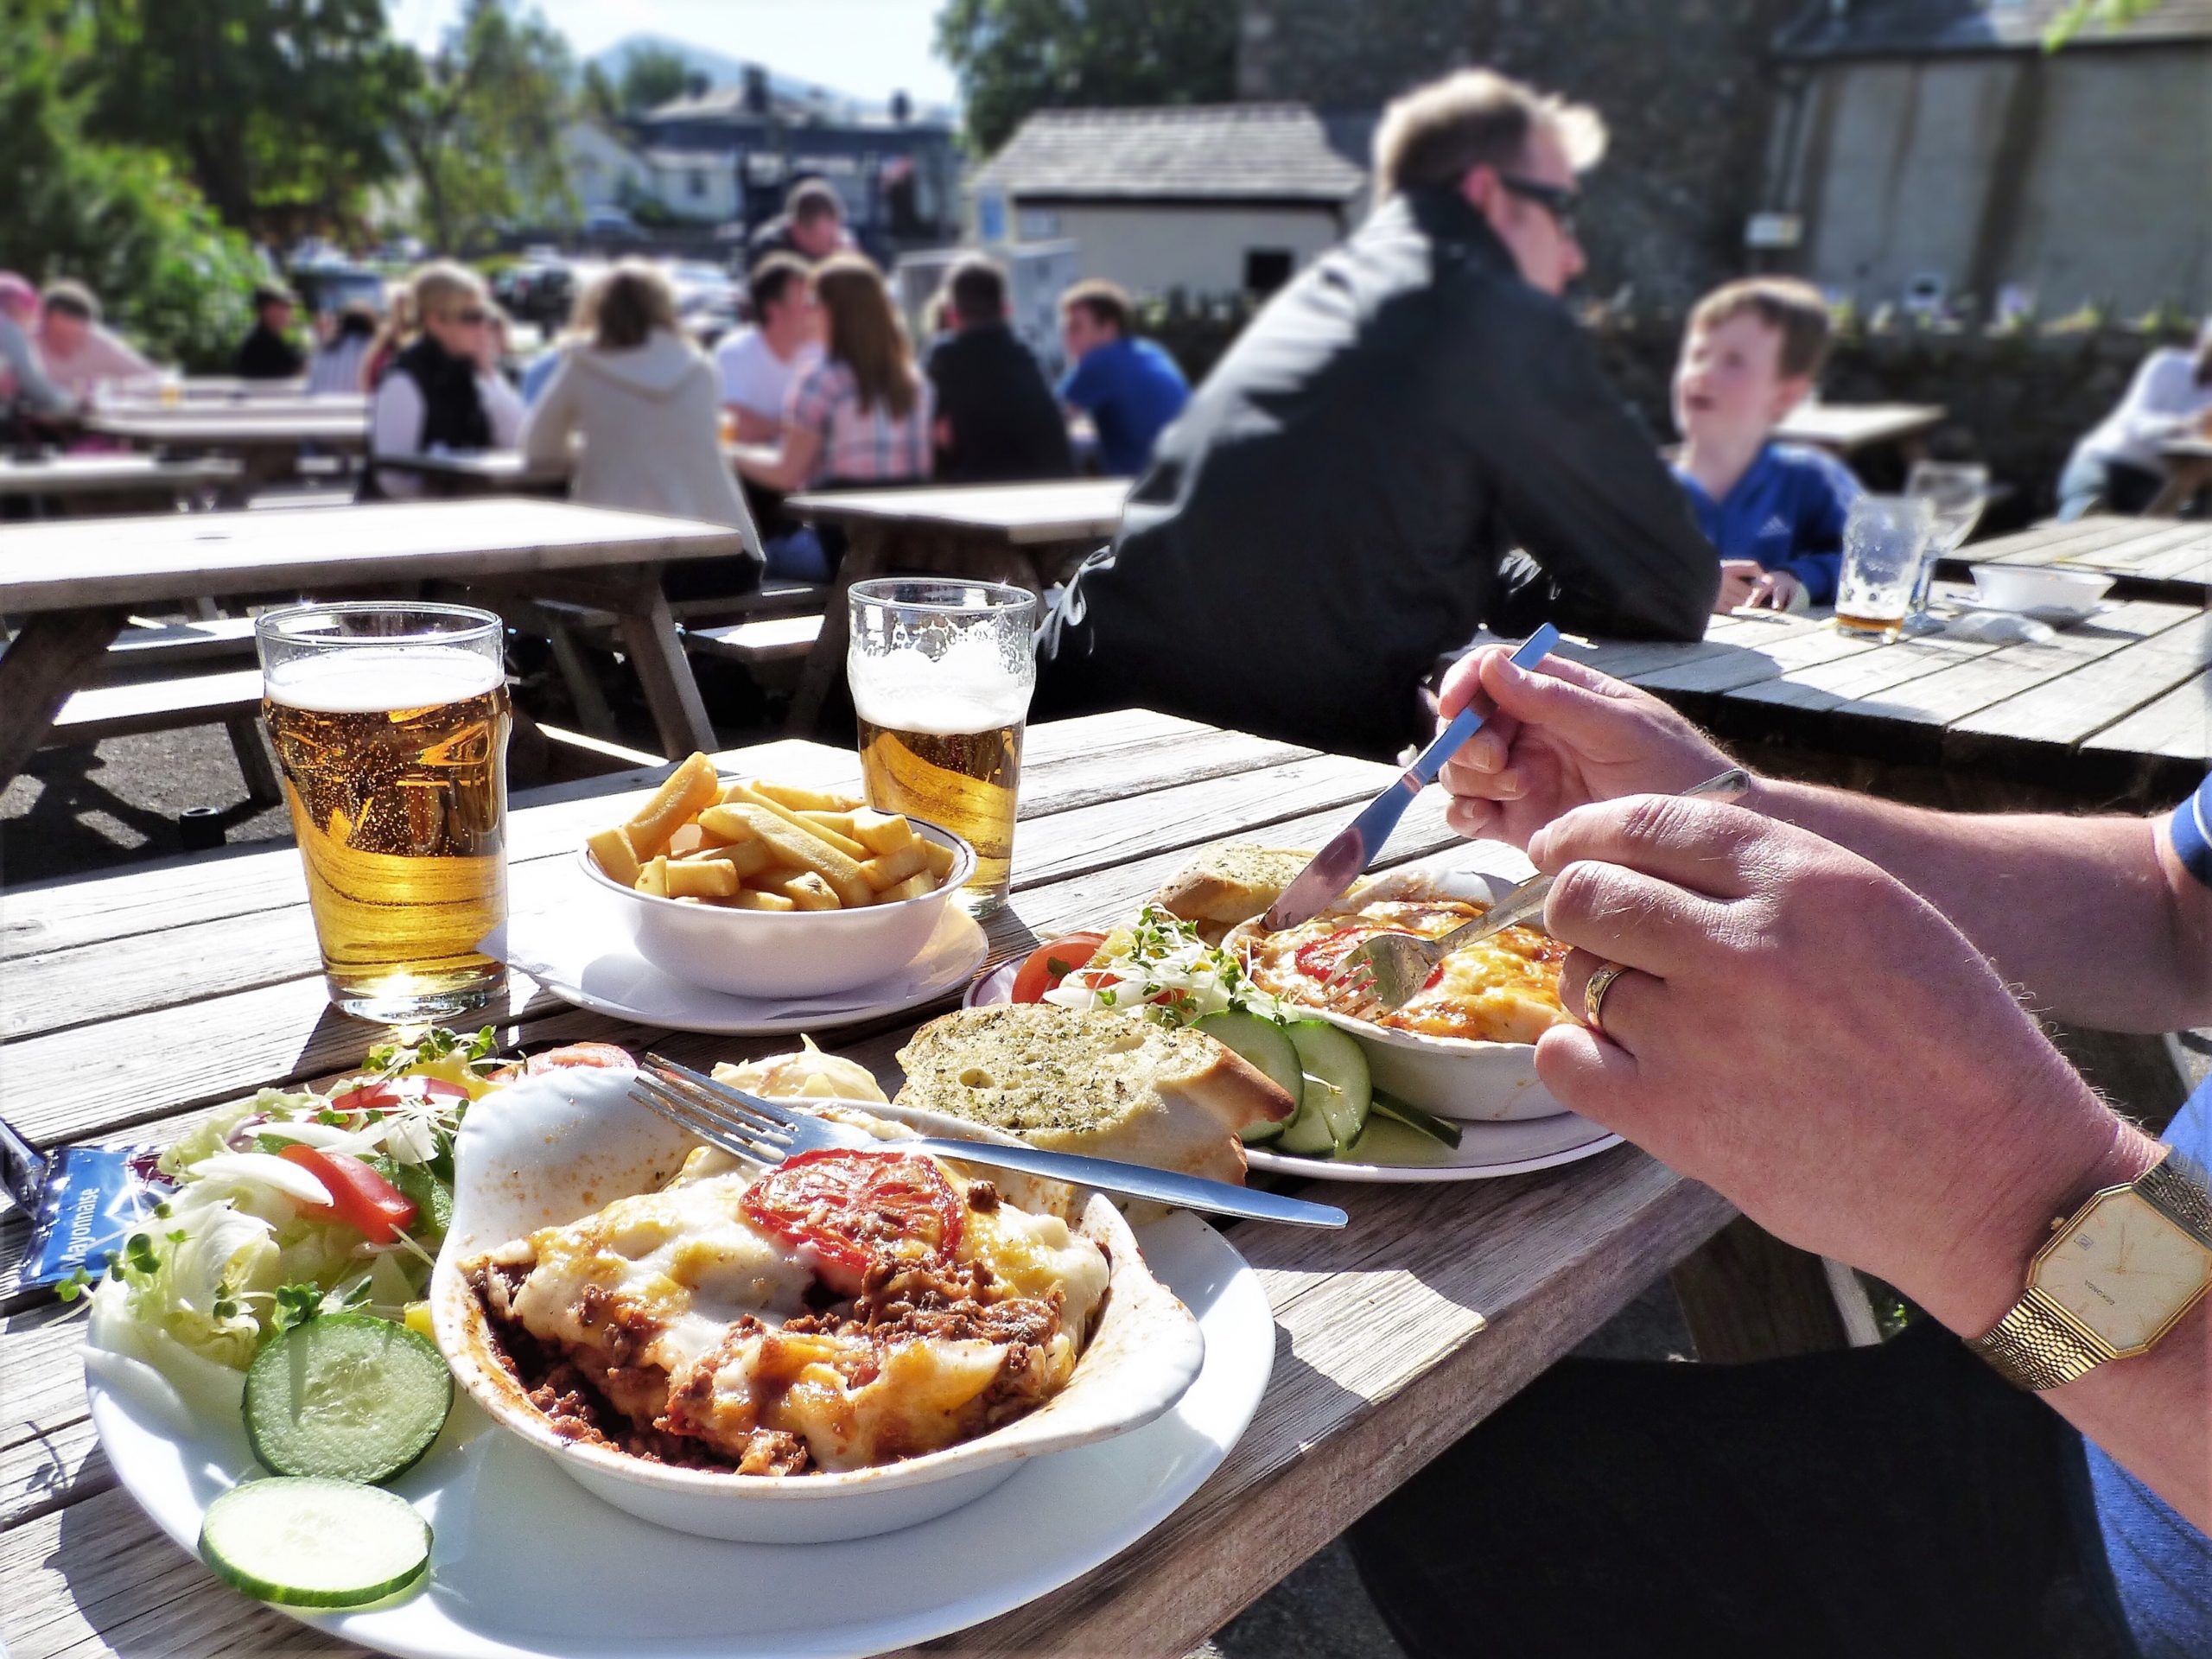 dining-outdoors-eating-a-meal-in-the-beer-garden-l-RWFAAQ4